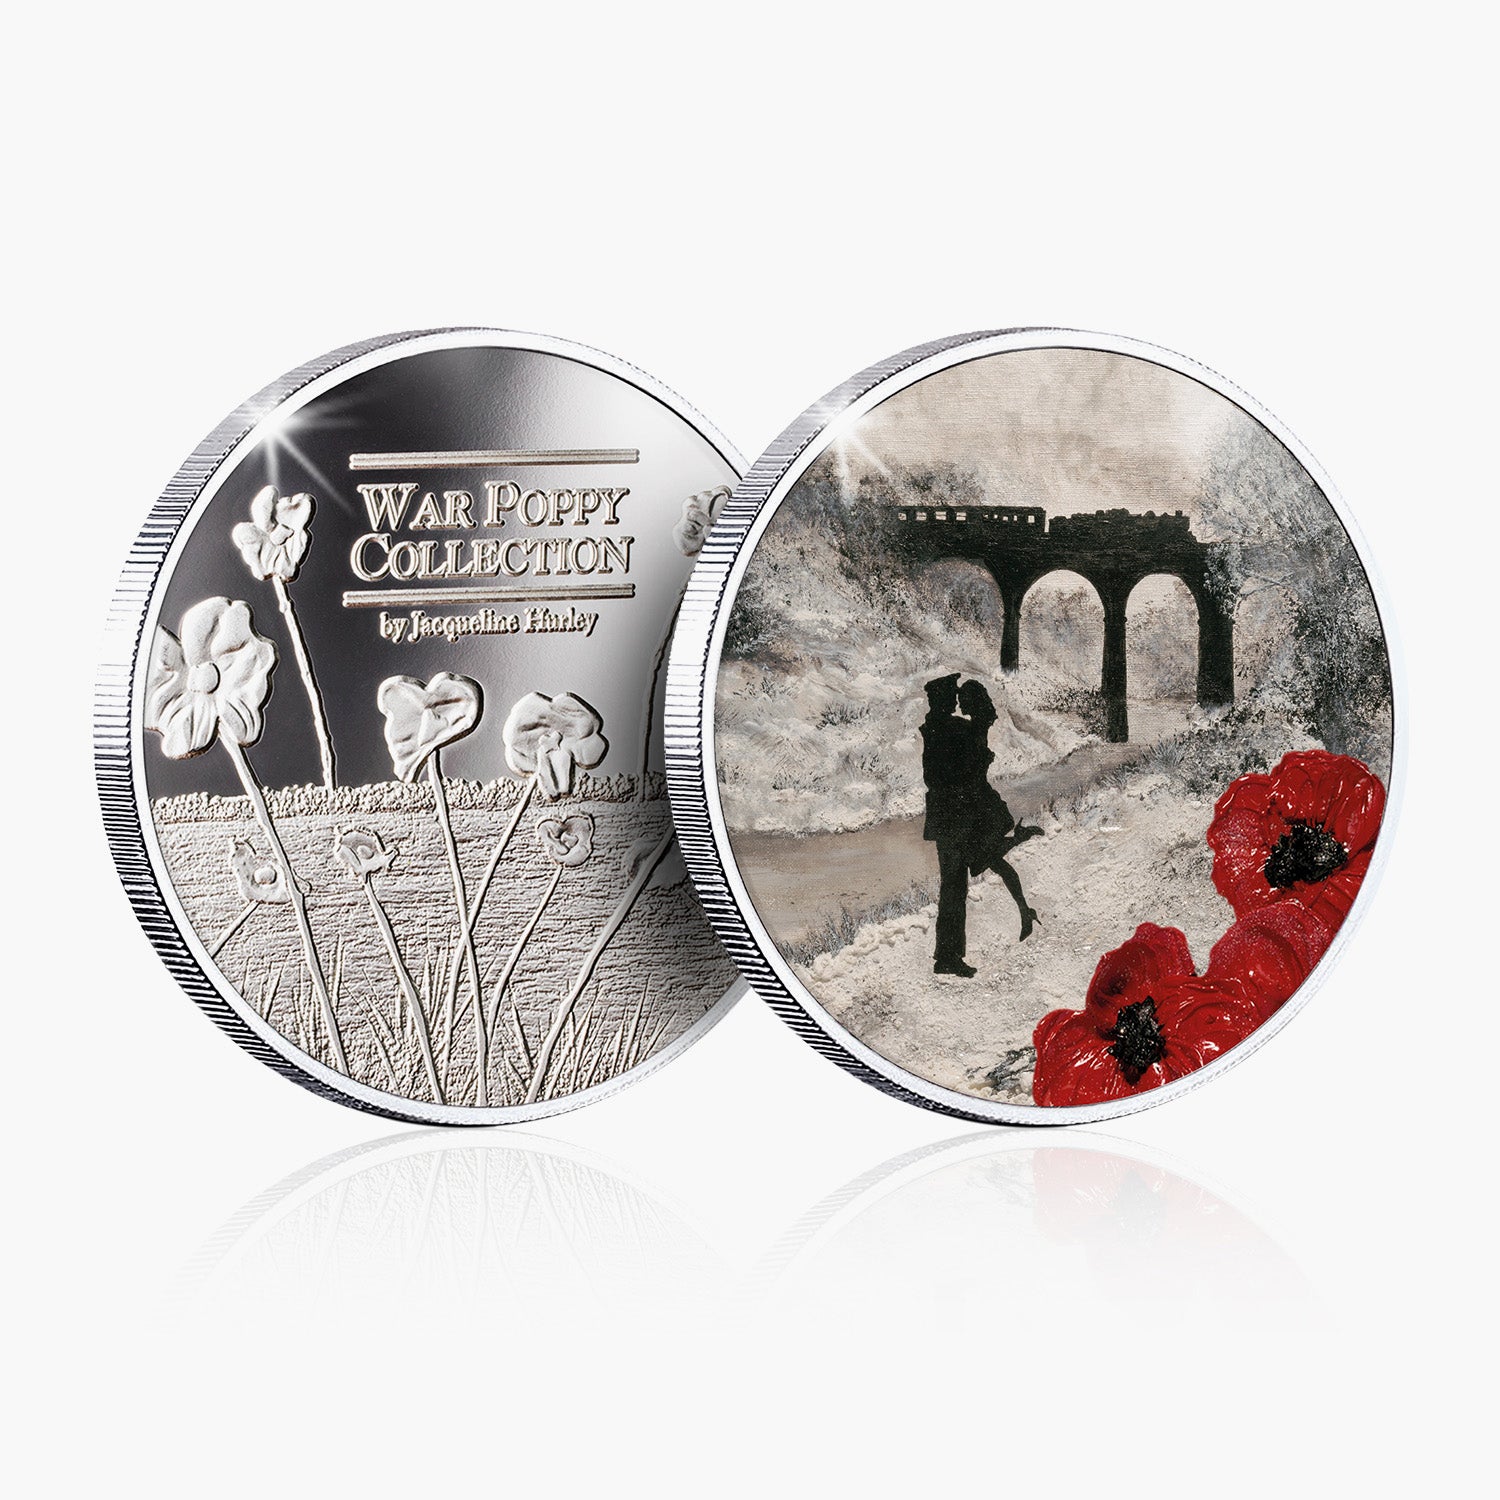 Home For Christmas Silver-Plated Commemorative